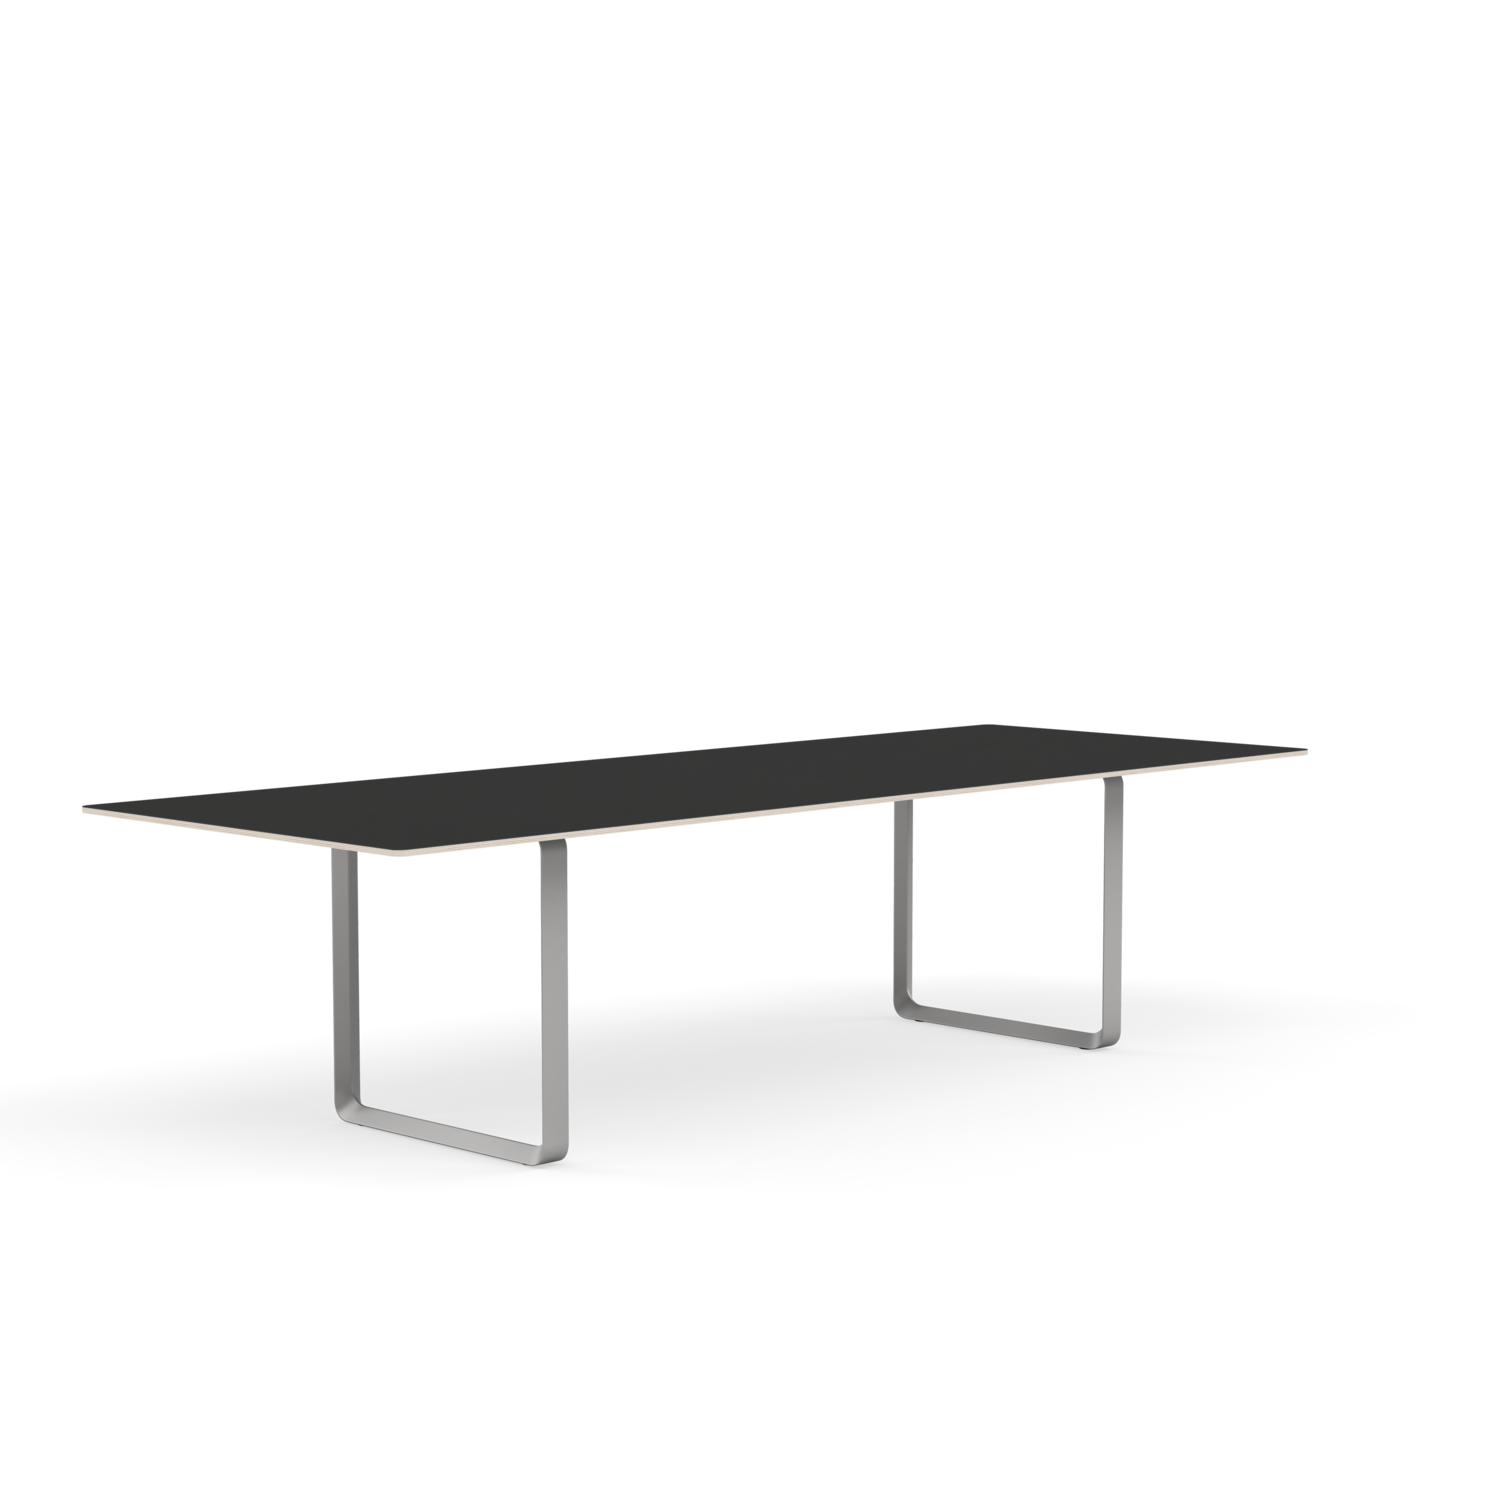 70/70 Table | A contemporary table for any space